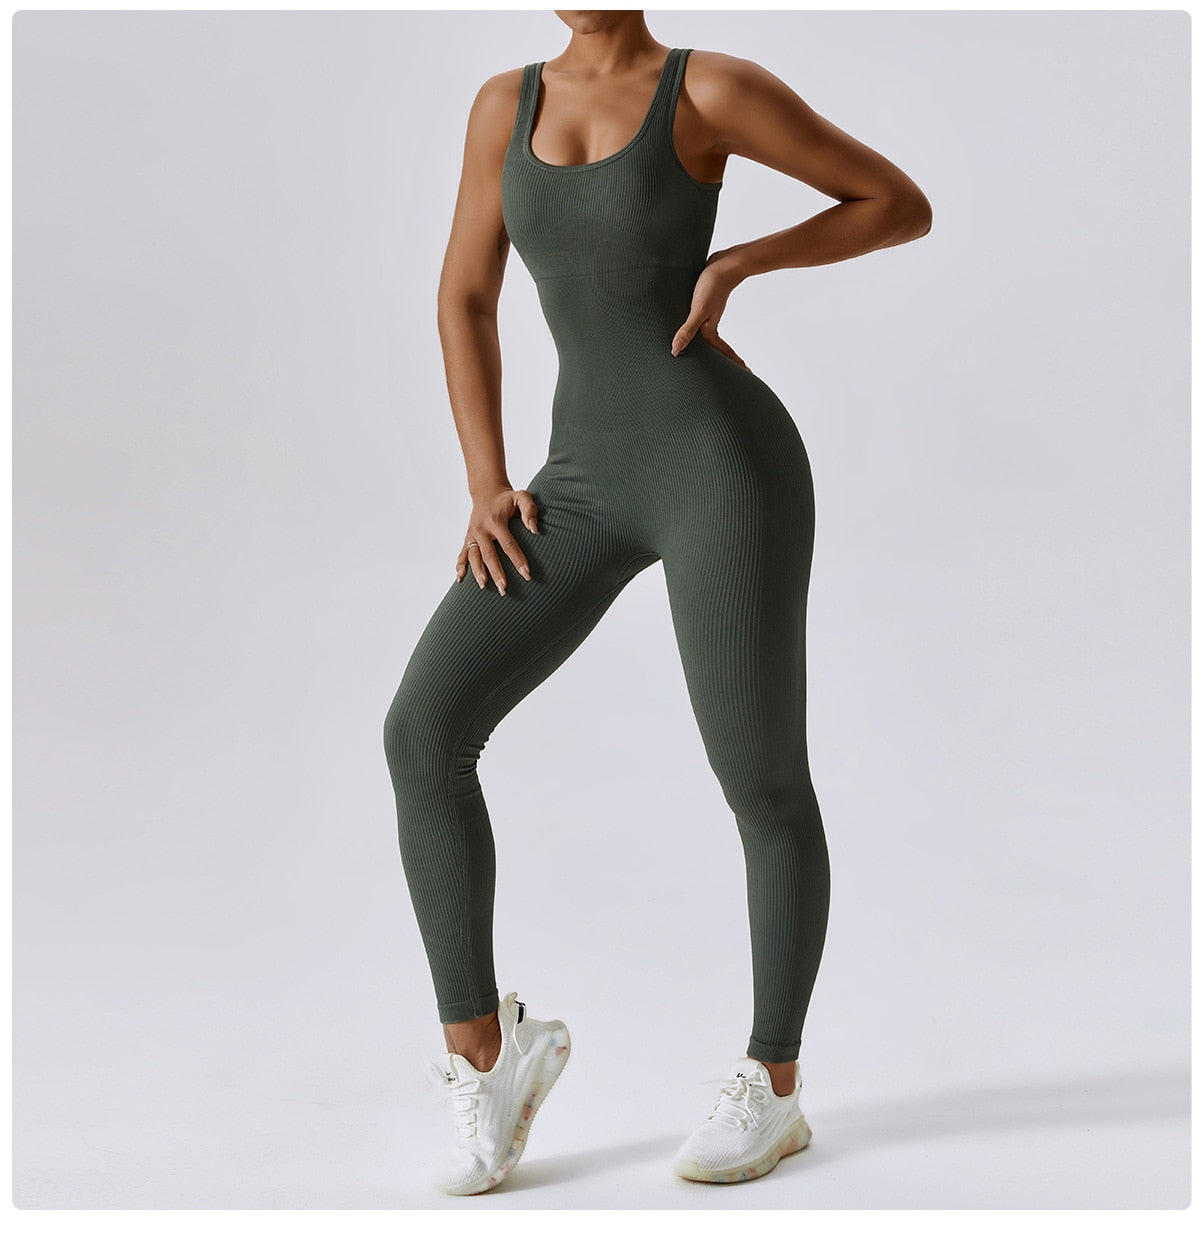 Women's Onesie Workout Sets Bootcut Solid Color Bodysuit Olive Green Black  Yoga Fitness Thermal Warm Breathable Sport Activewear High Elasticity